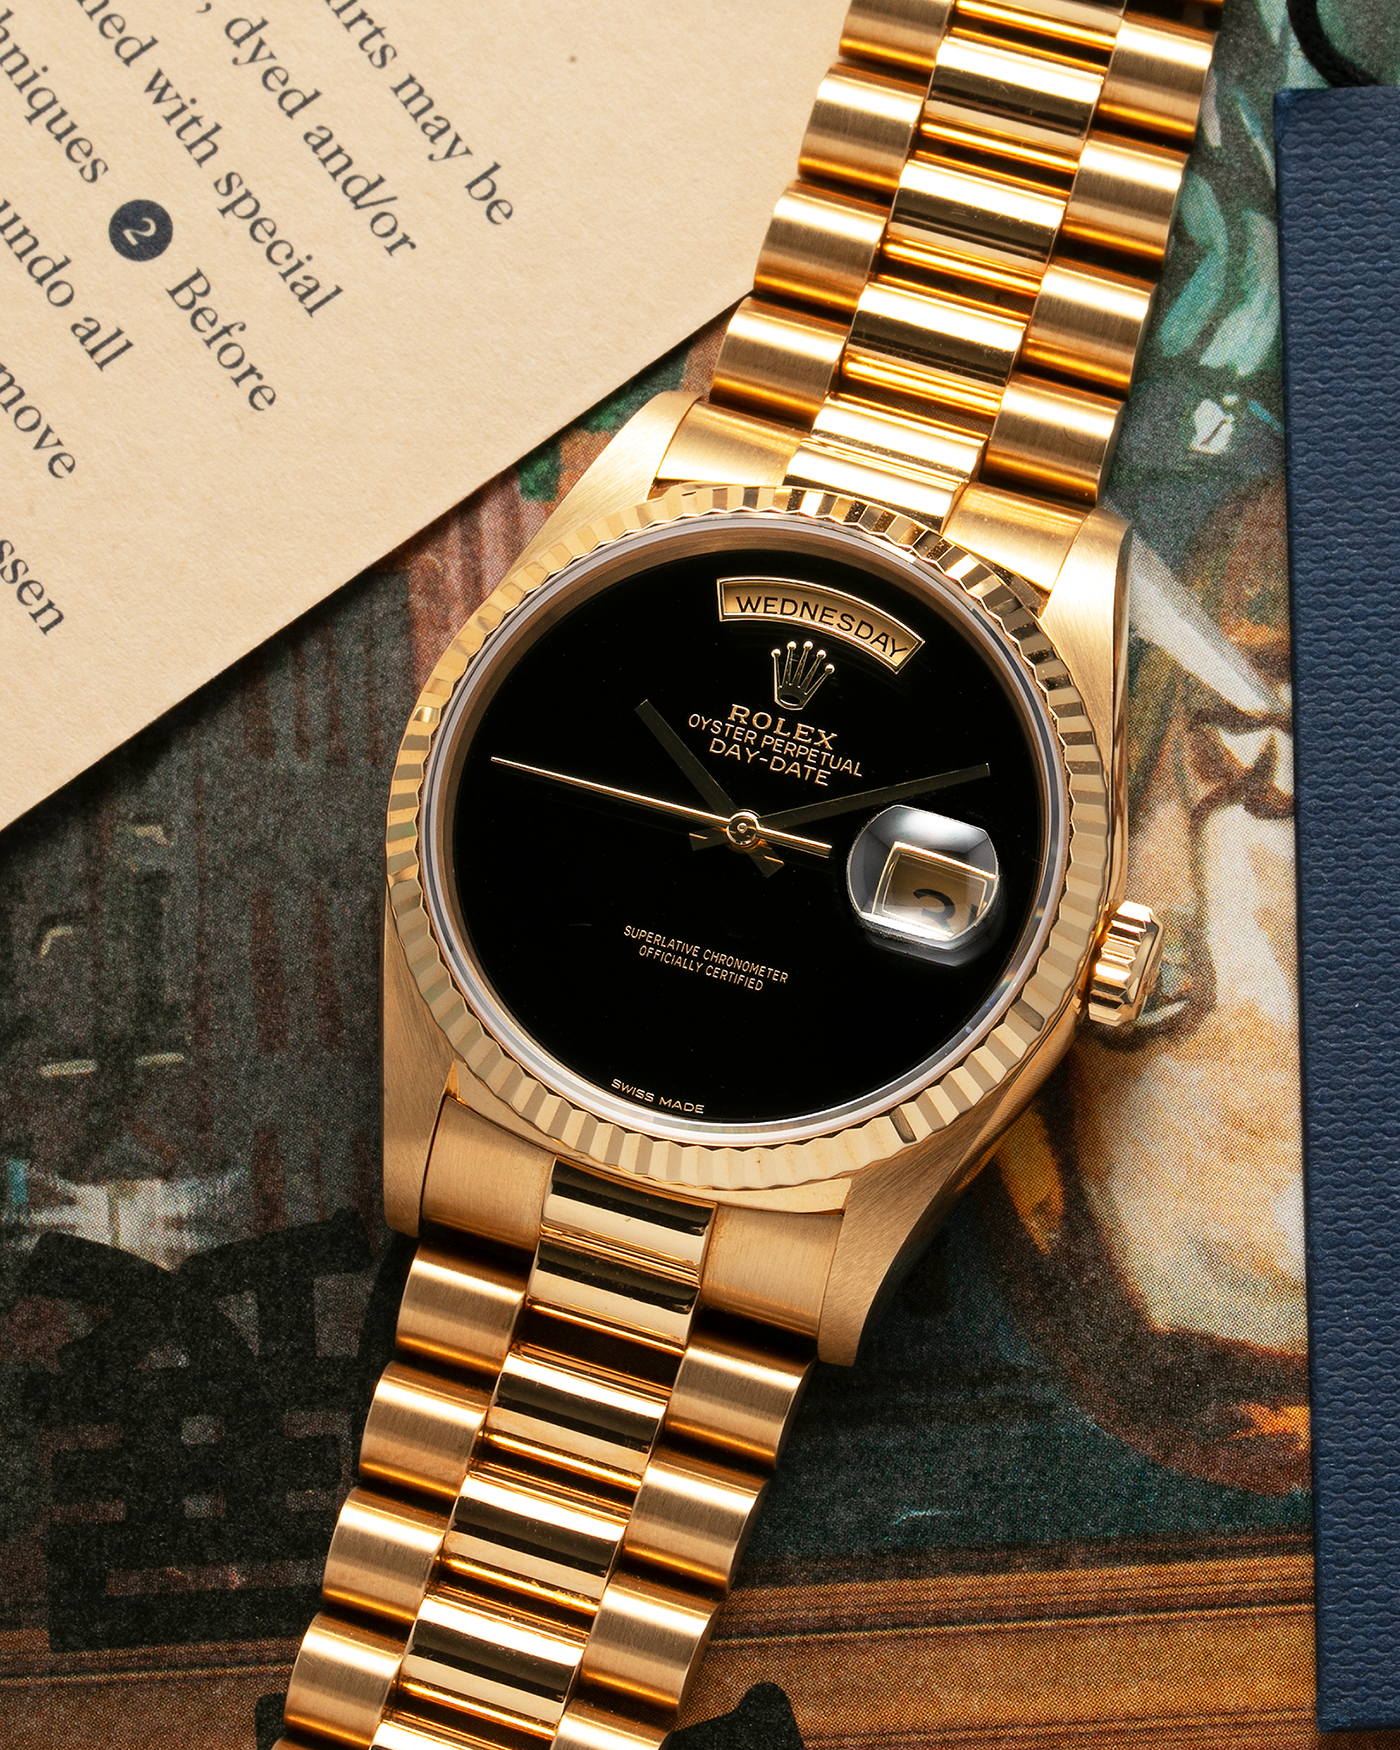 Brand: Rolex Year: 1996 Model: Day Date Reference Number: 18238 Serial Number: W409XXX Material: 18-carat Yellow Gold, Black Onyx Dial Movement: Rolex Cal. 3155, Self-Winding Case Diameter: 36mm Lug Width: 20mm Bracelet: Rolex 18-carat Yellow Gold 8385 Presidential Bracelet with 55B Curved End Links